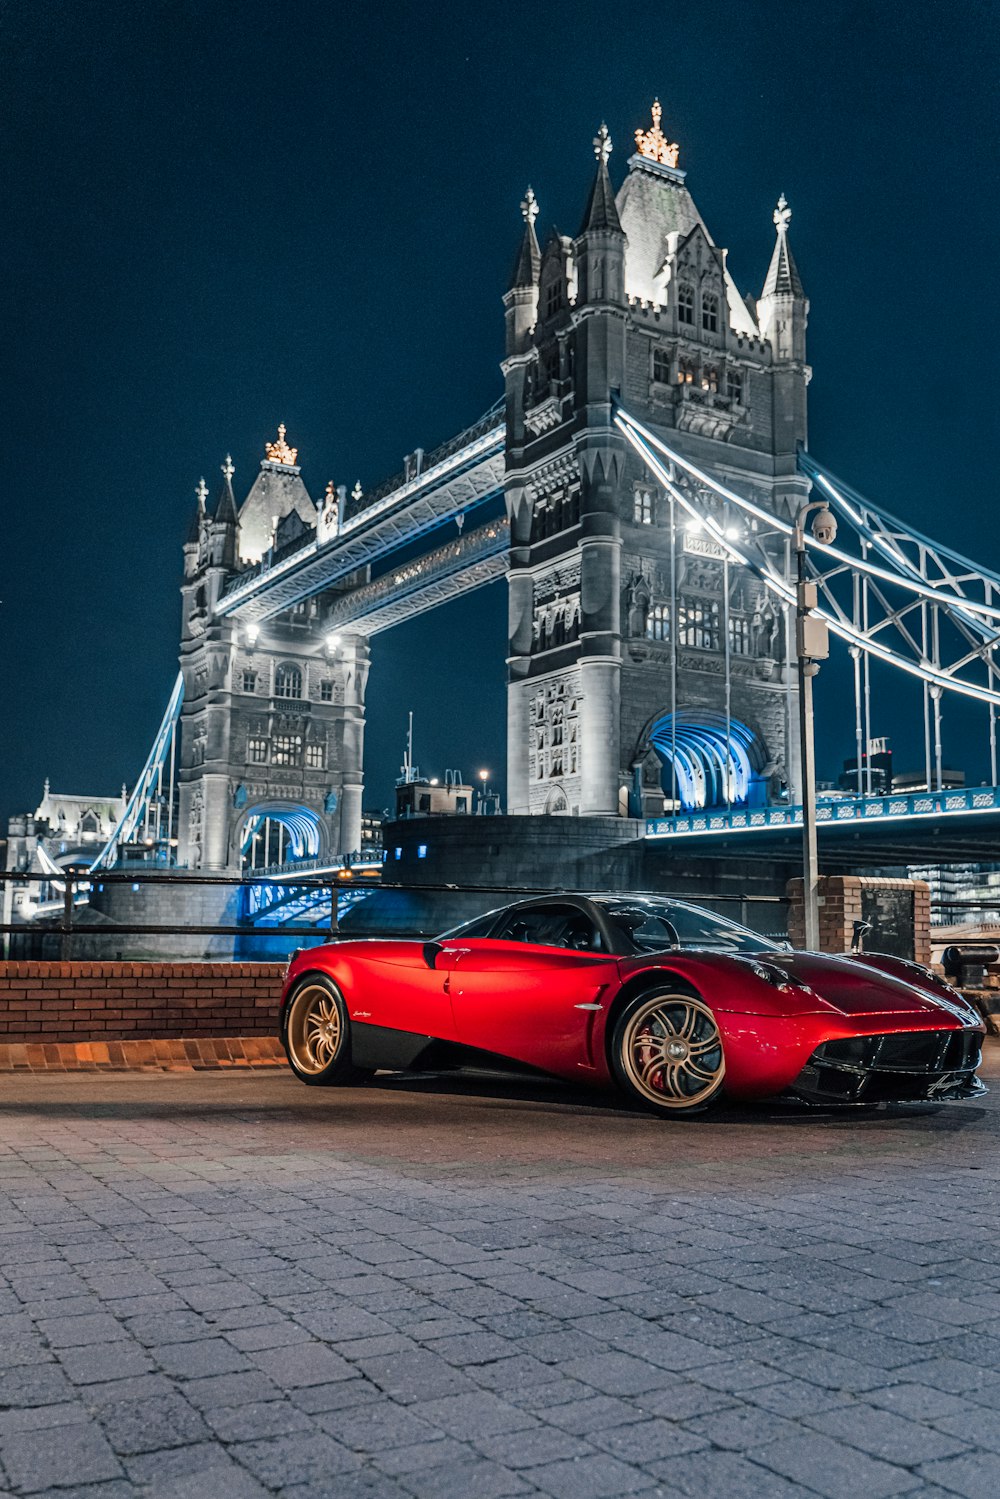 a red sports car parked in front of a bridge